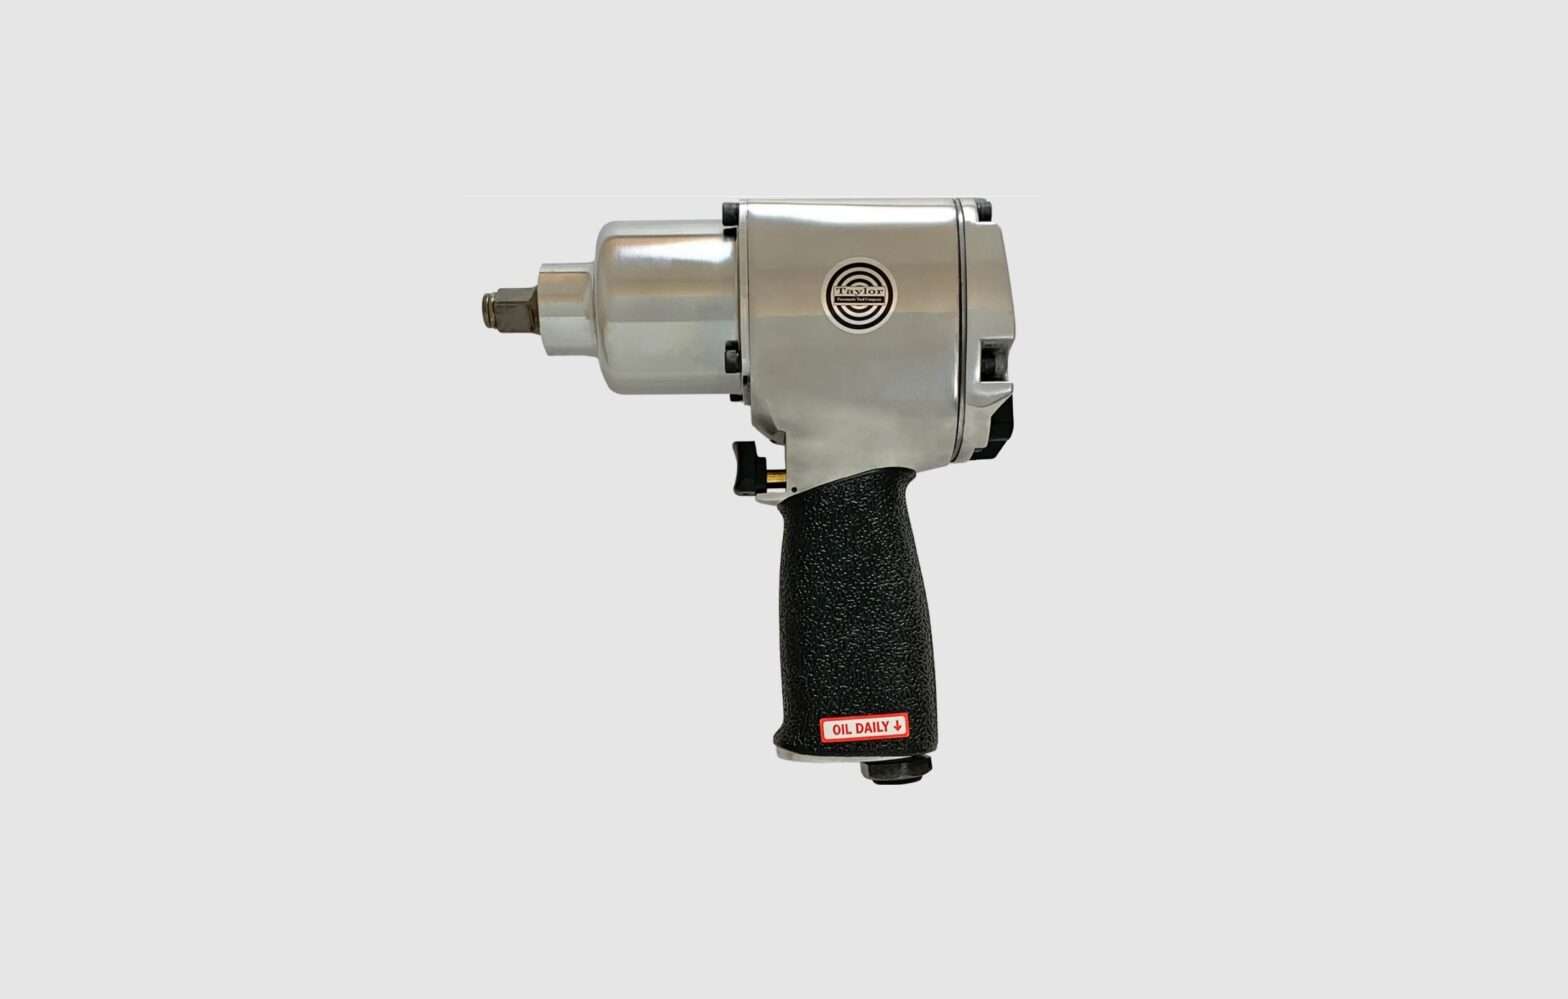 Taylor T-7749 1 2 Inch Impact Wrench T-7749L Extended Instruction Manual - Featured image